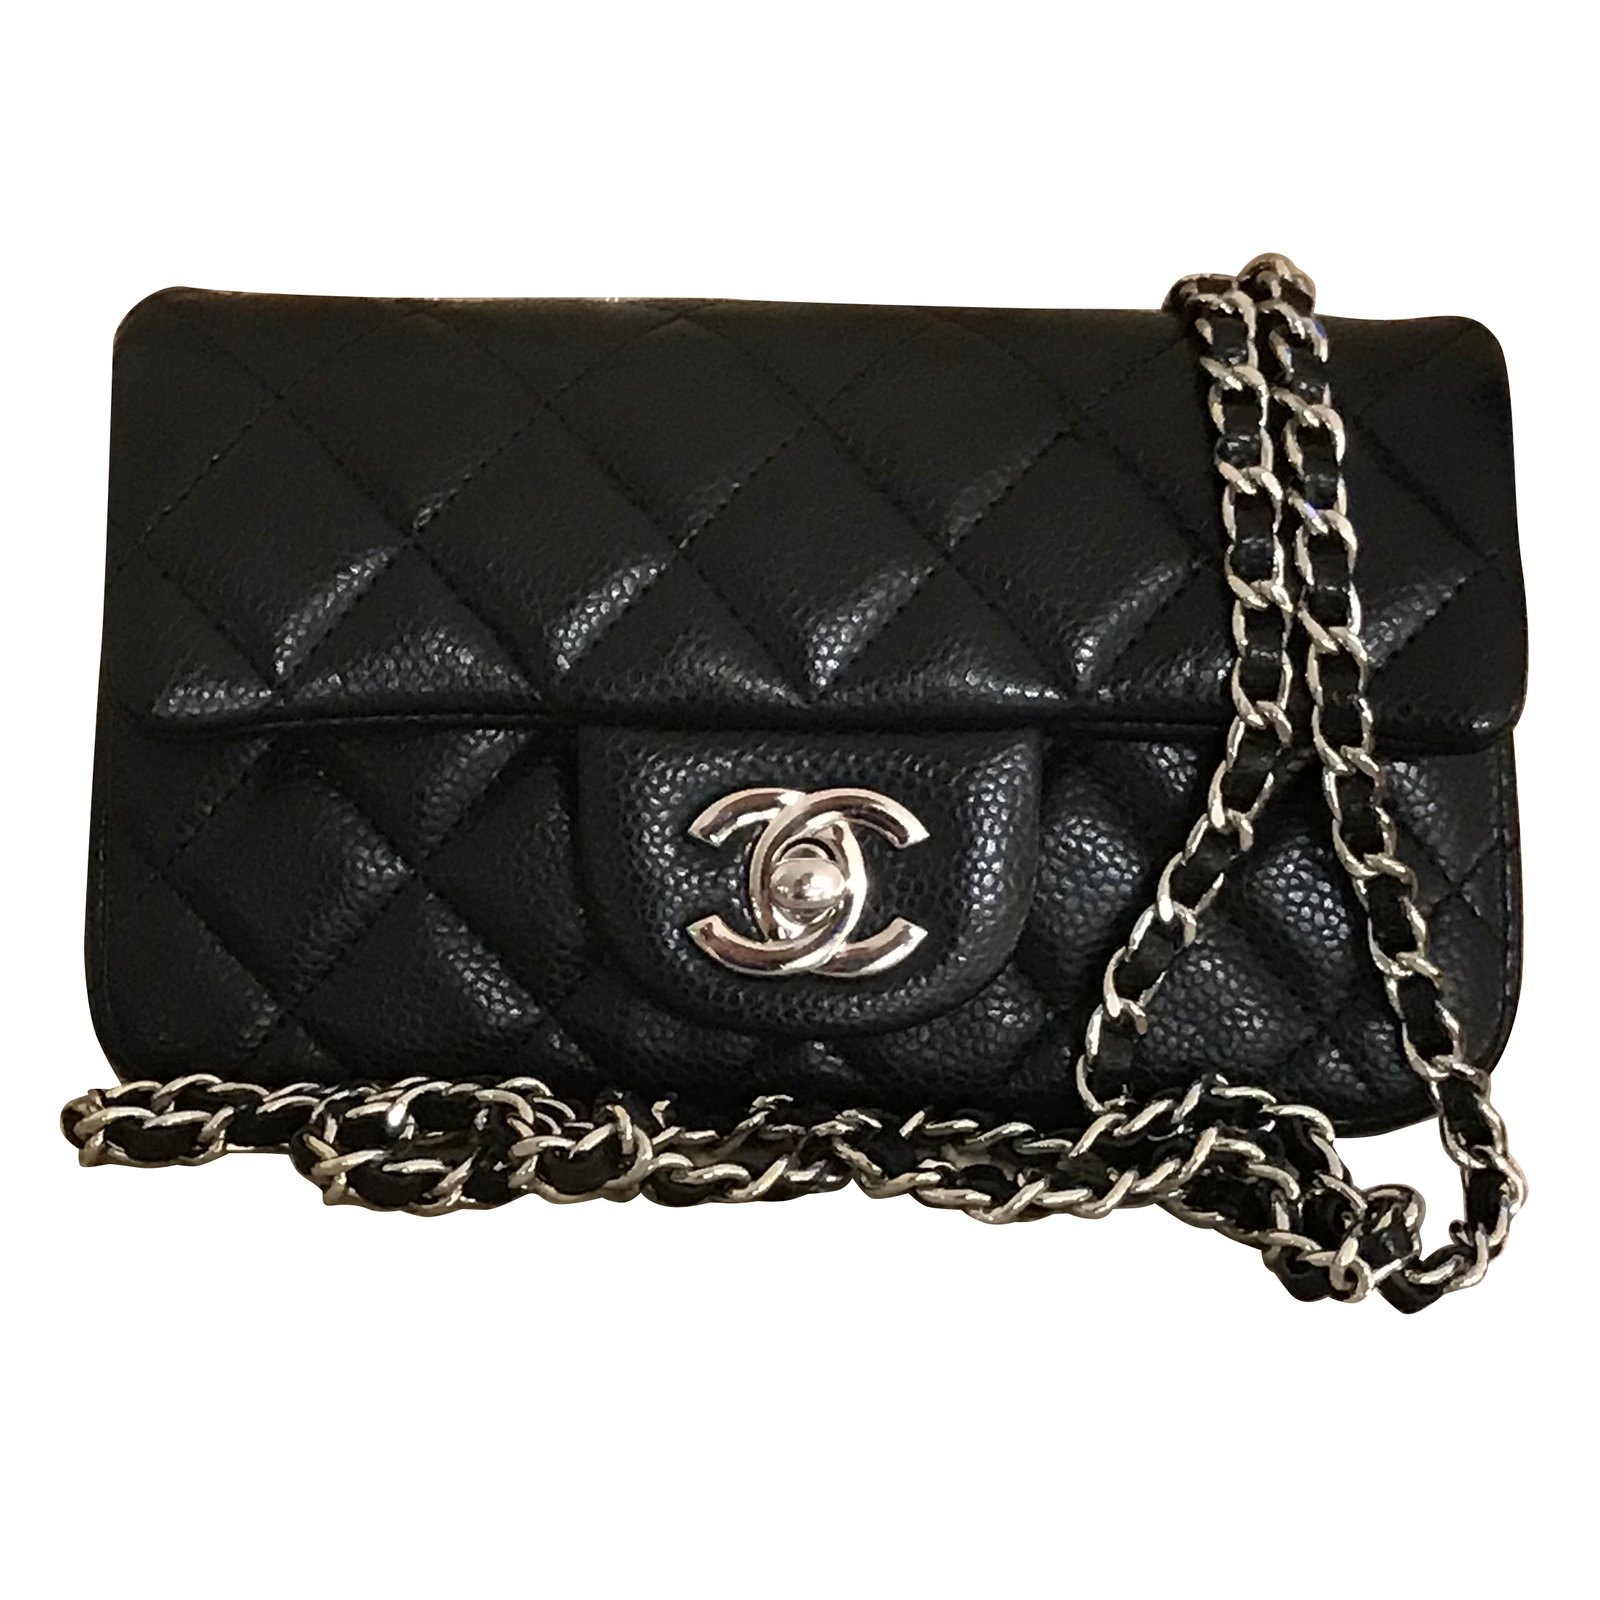 extra mini classic flap bag in black caviar leather with silver hw